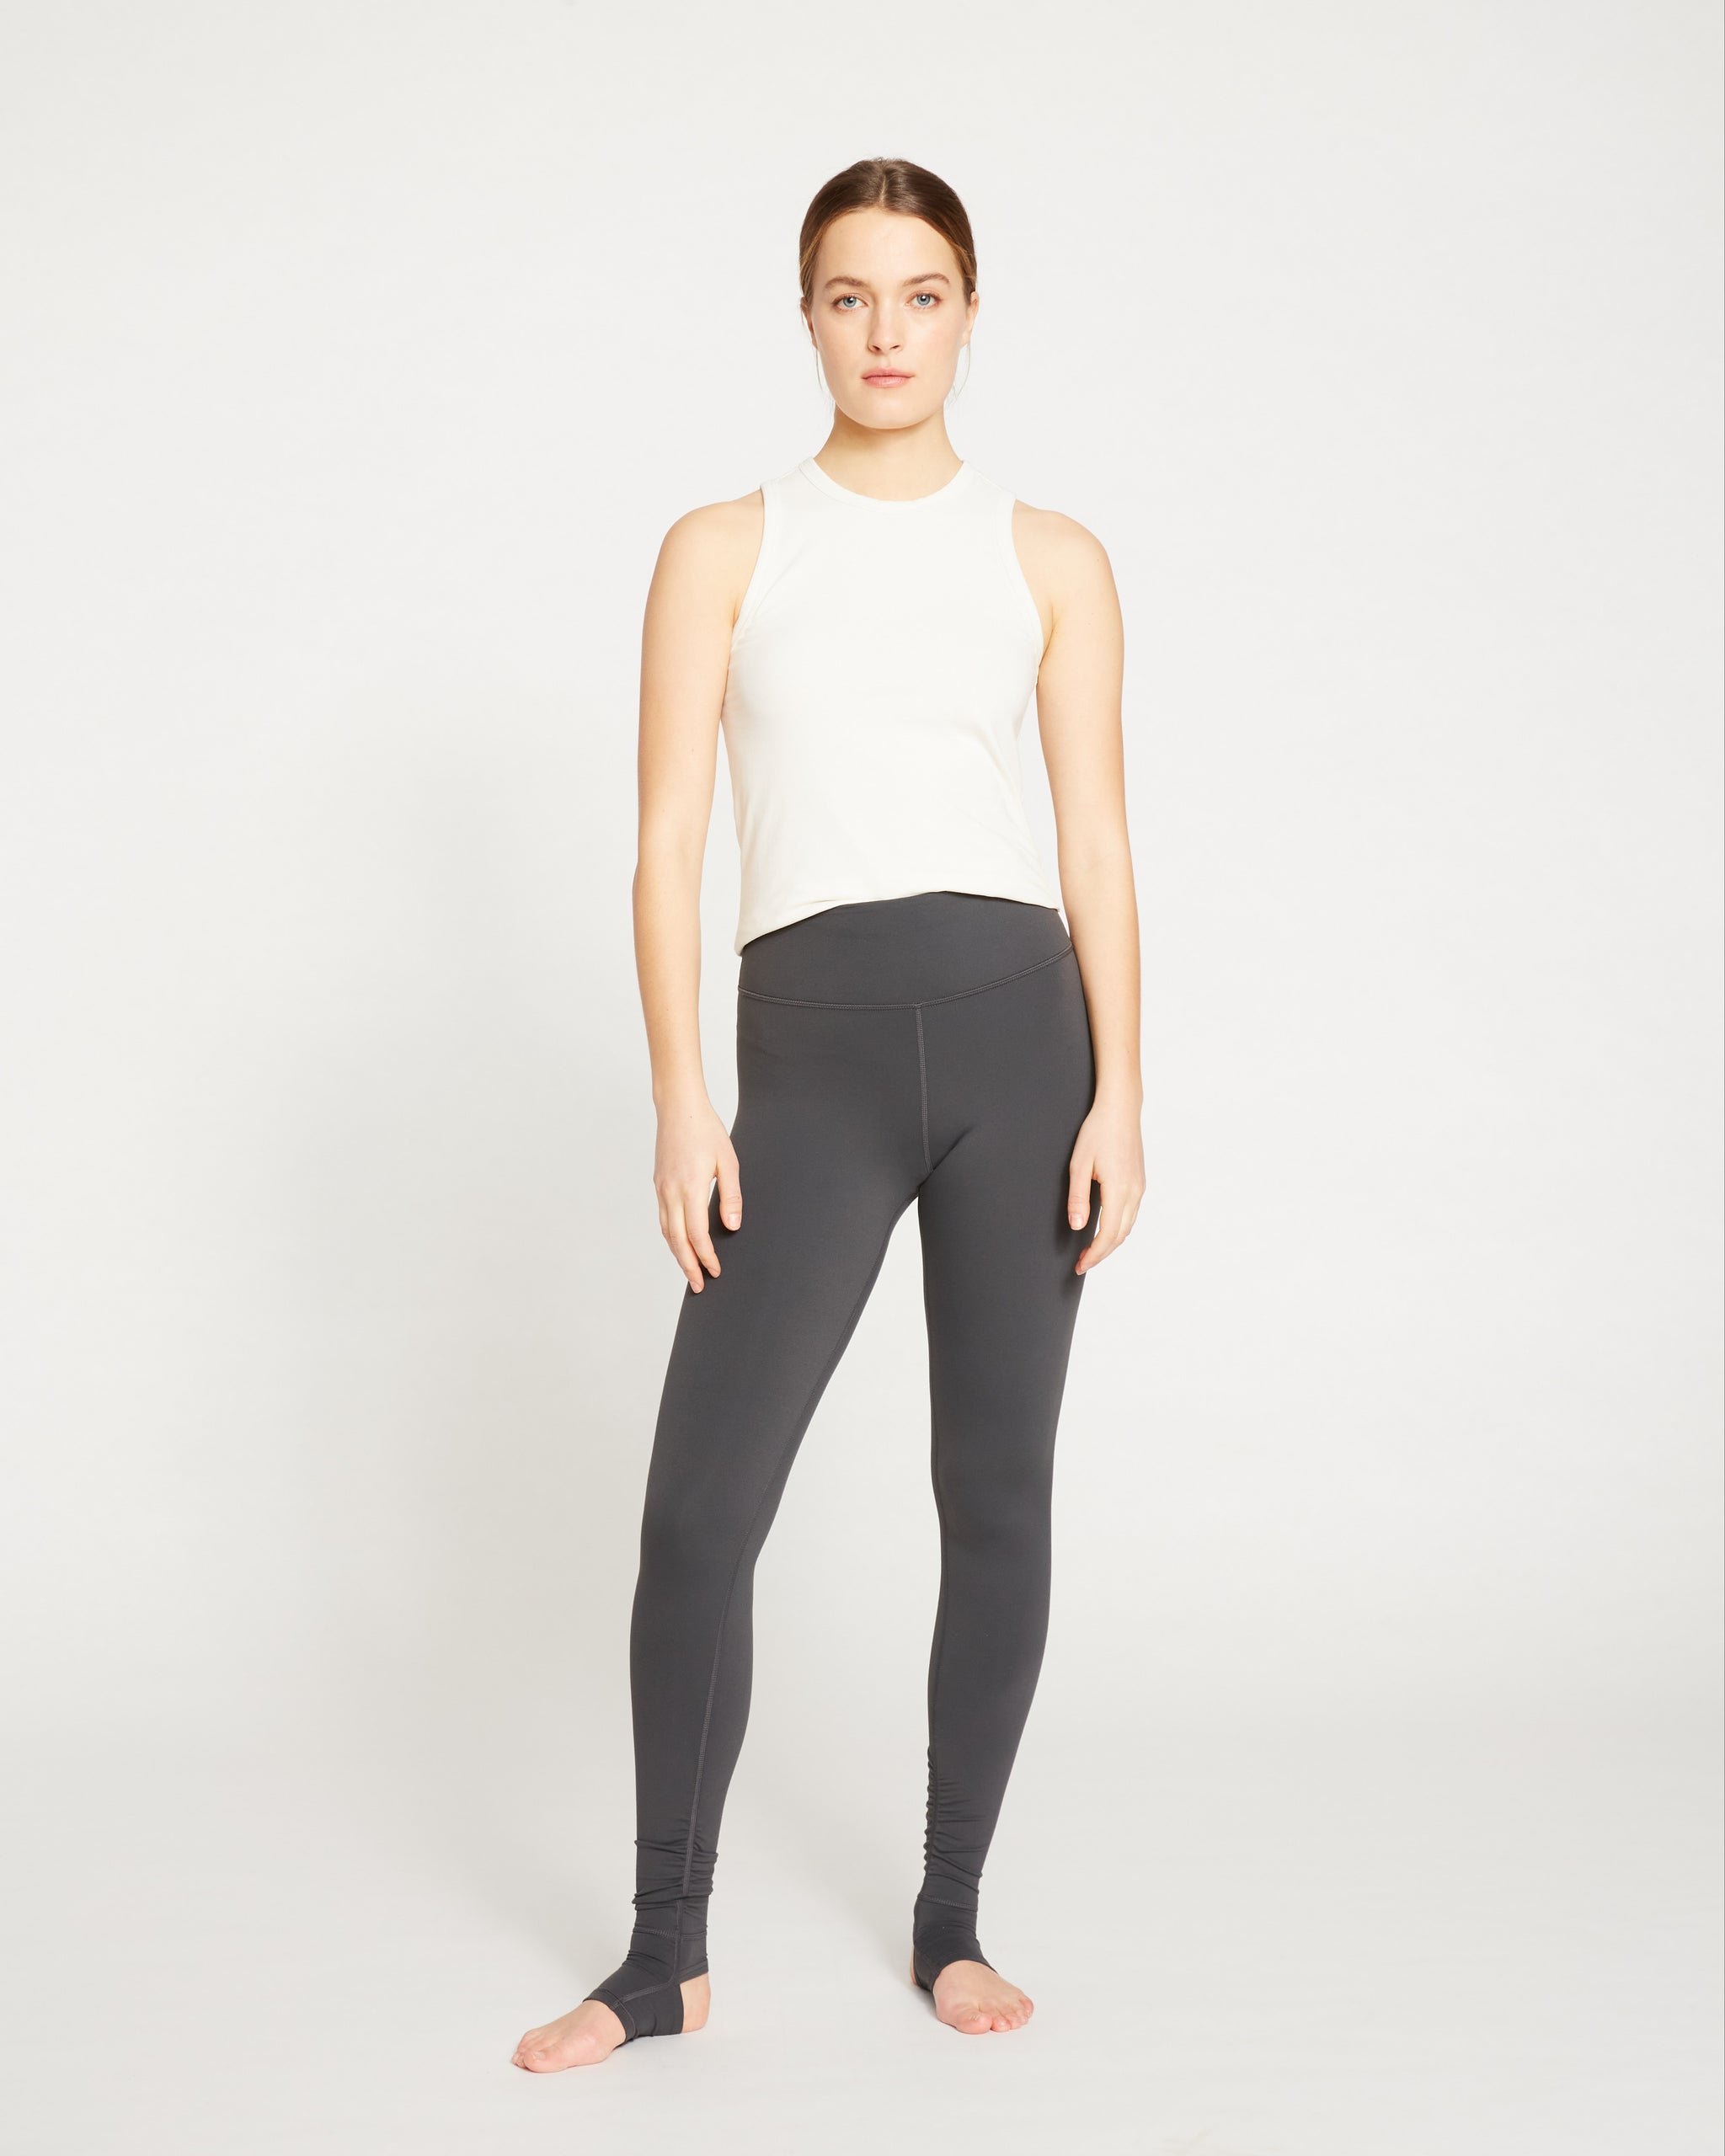 How to Wear Leggings: Stirrup Leggings Are the Comfy Fashion Trend to Try